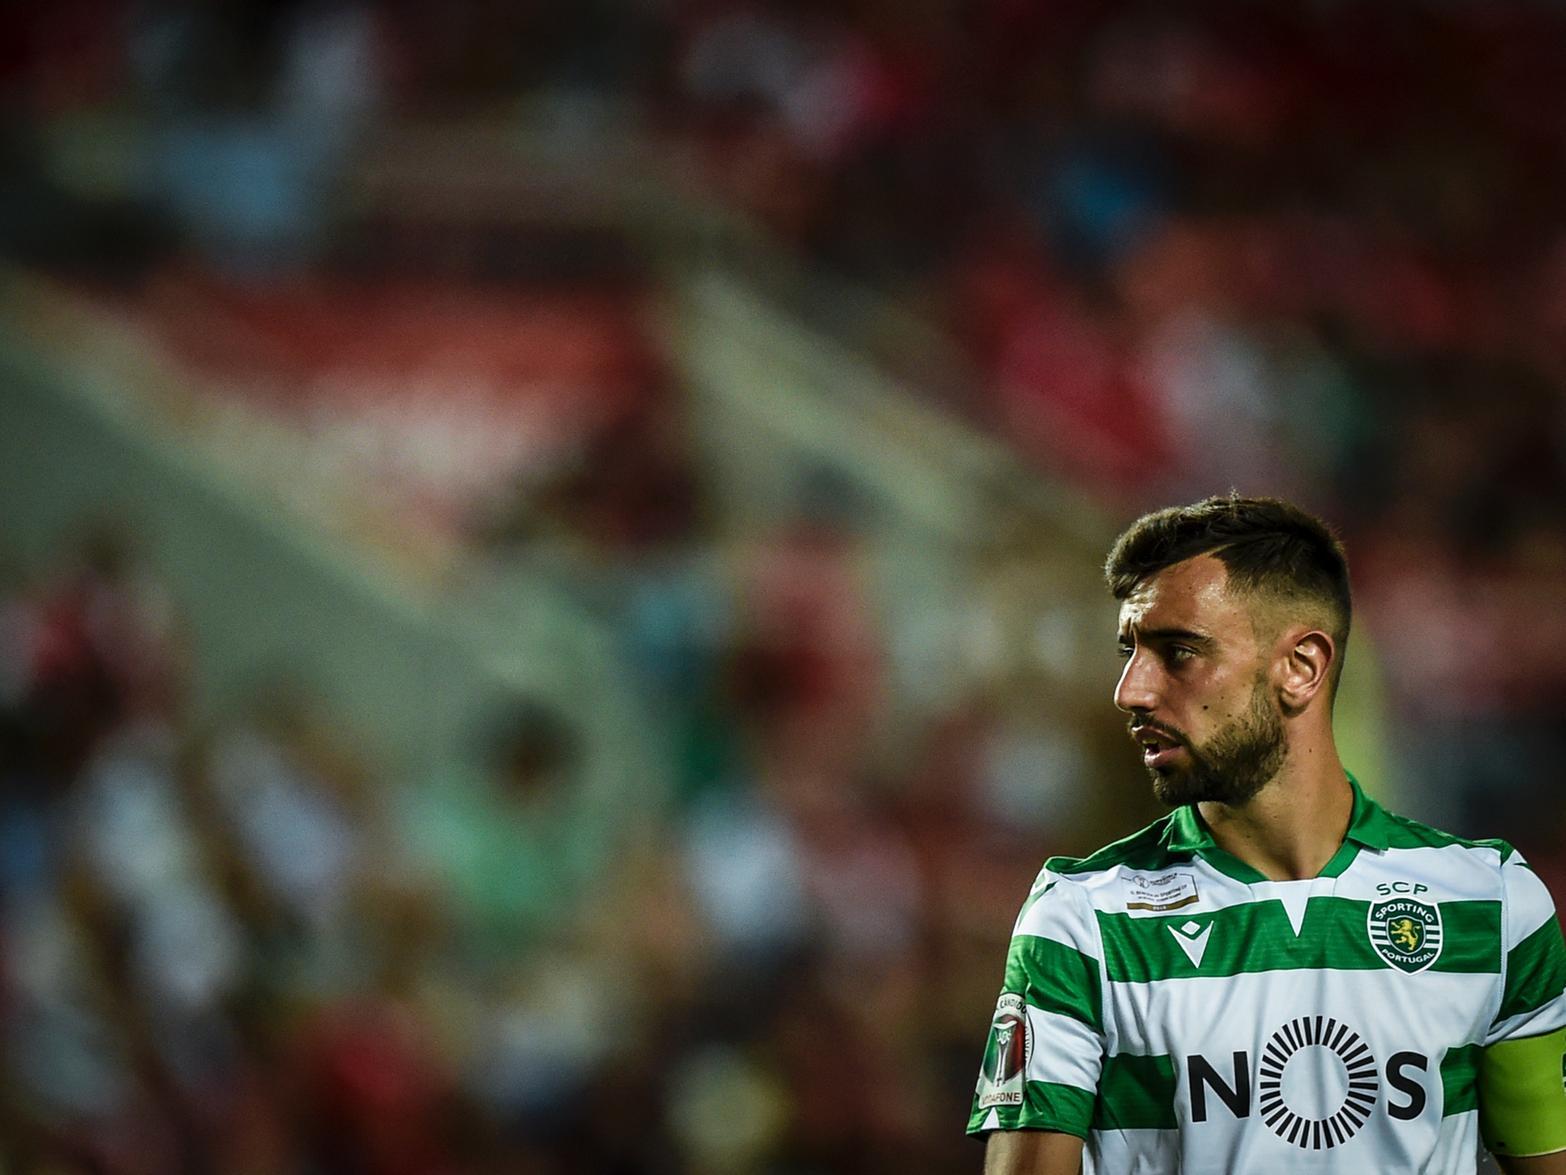 Sporting Lisbon midfielder Bruno Fernandes wants a move to Manchester United amid heightened speculation. (Sky Sports)